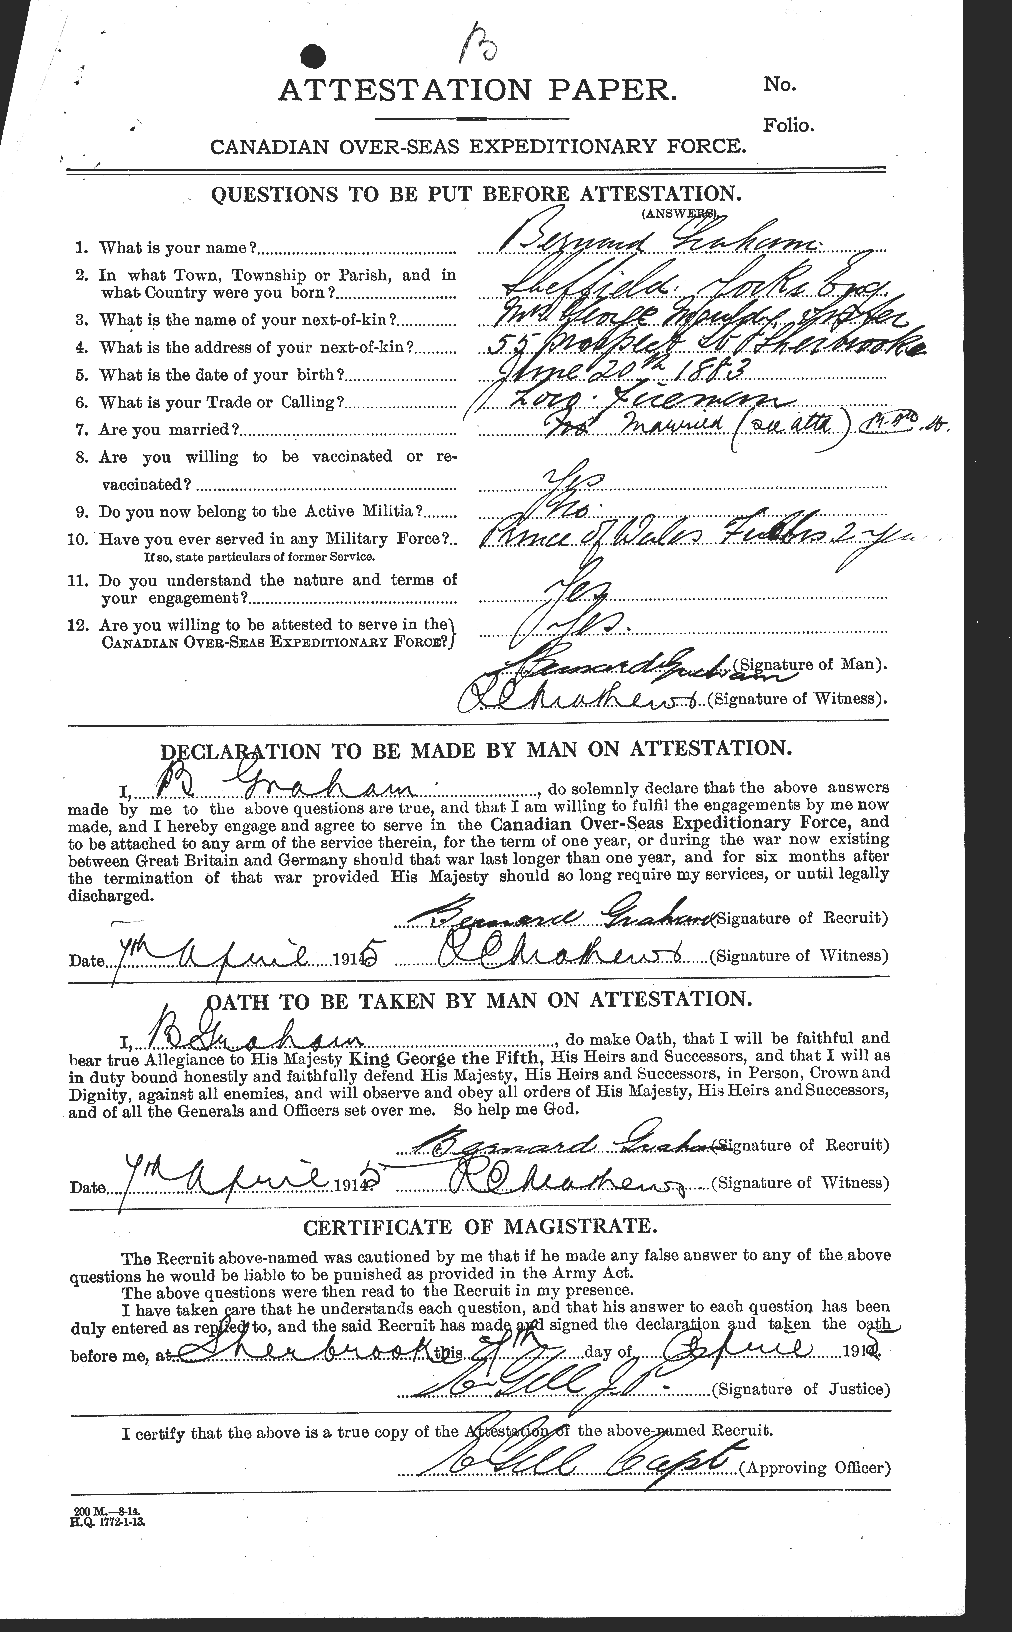 Personnel Records of the First World War - CEF 359668a